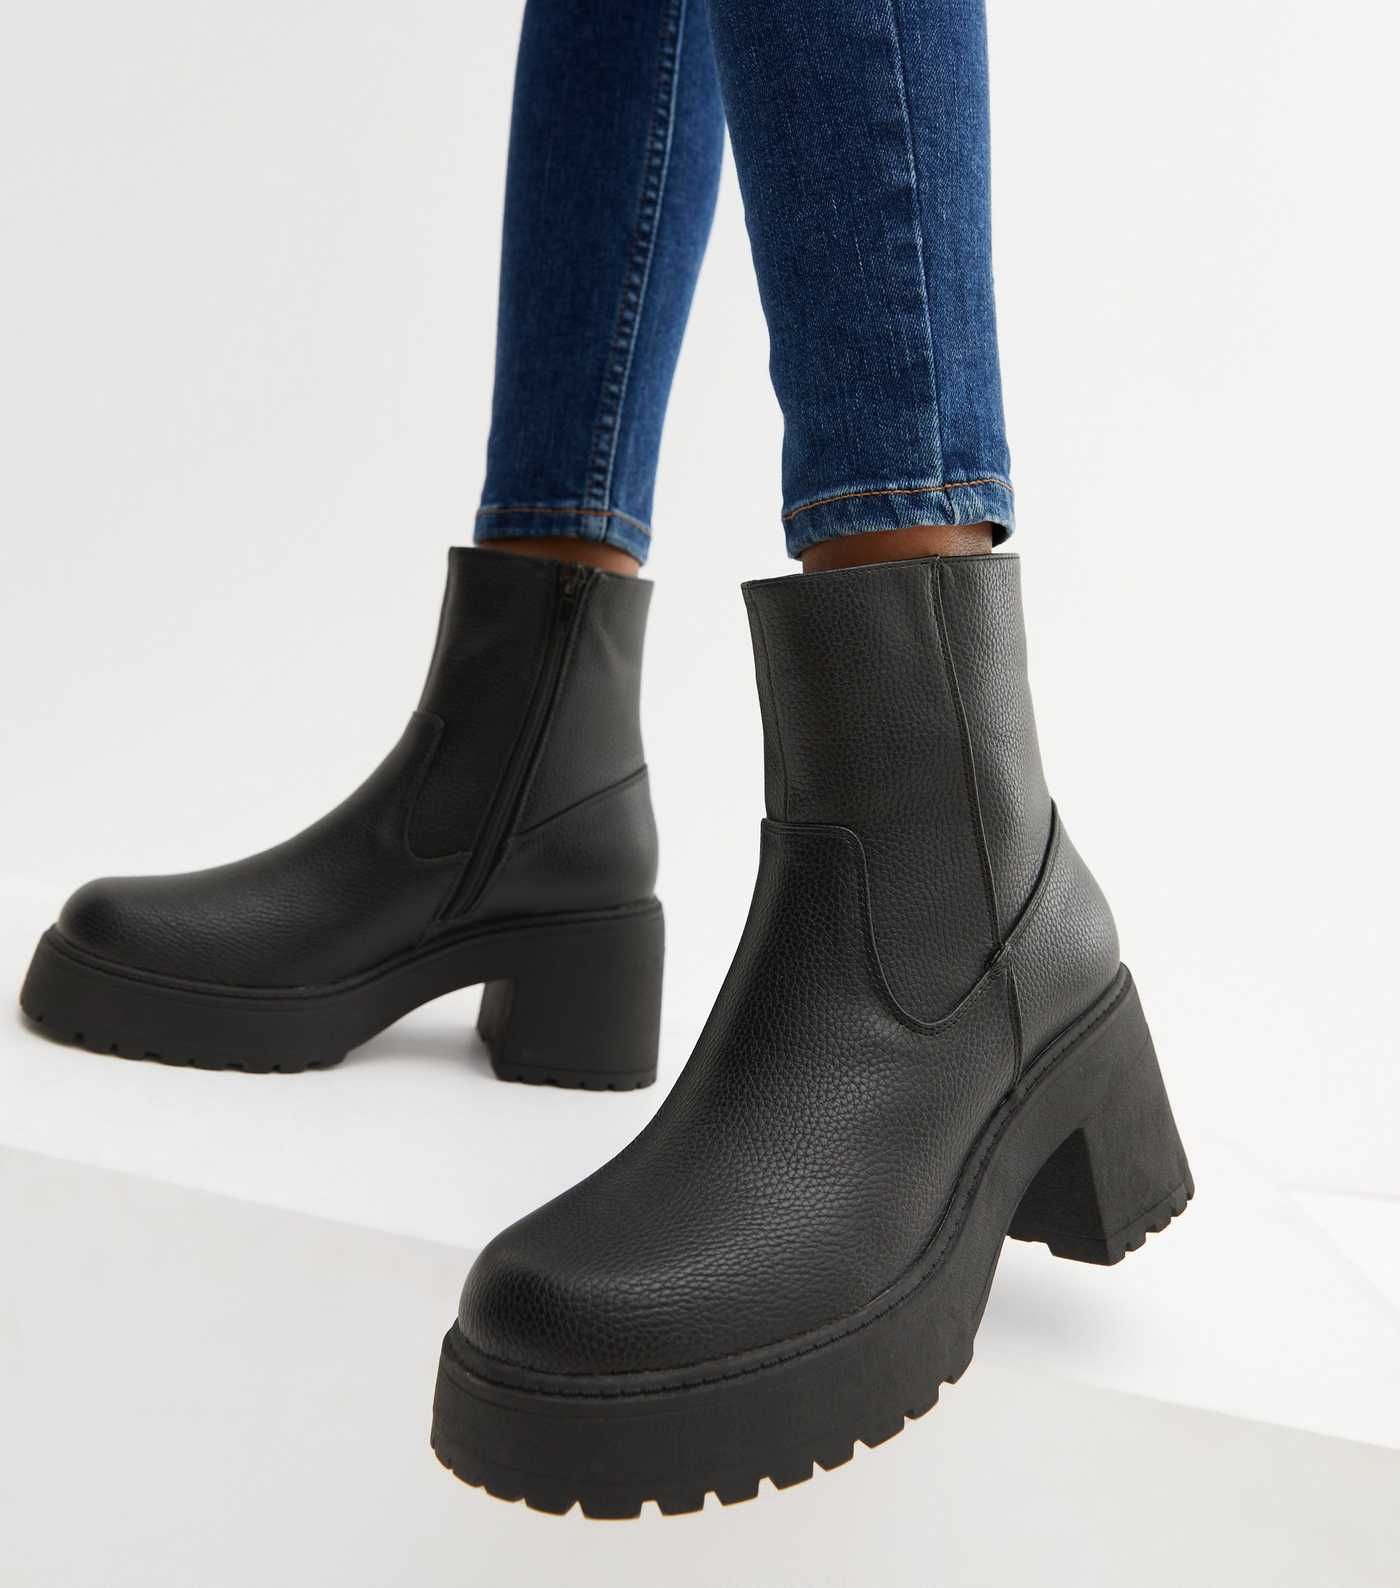 Black Chunky Block Heel Sock Boots
						
						Add to Saved Items
						Remove from Saved Items | New Look (UK)